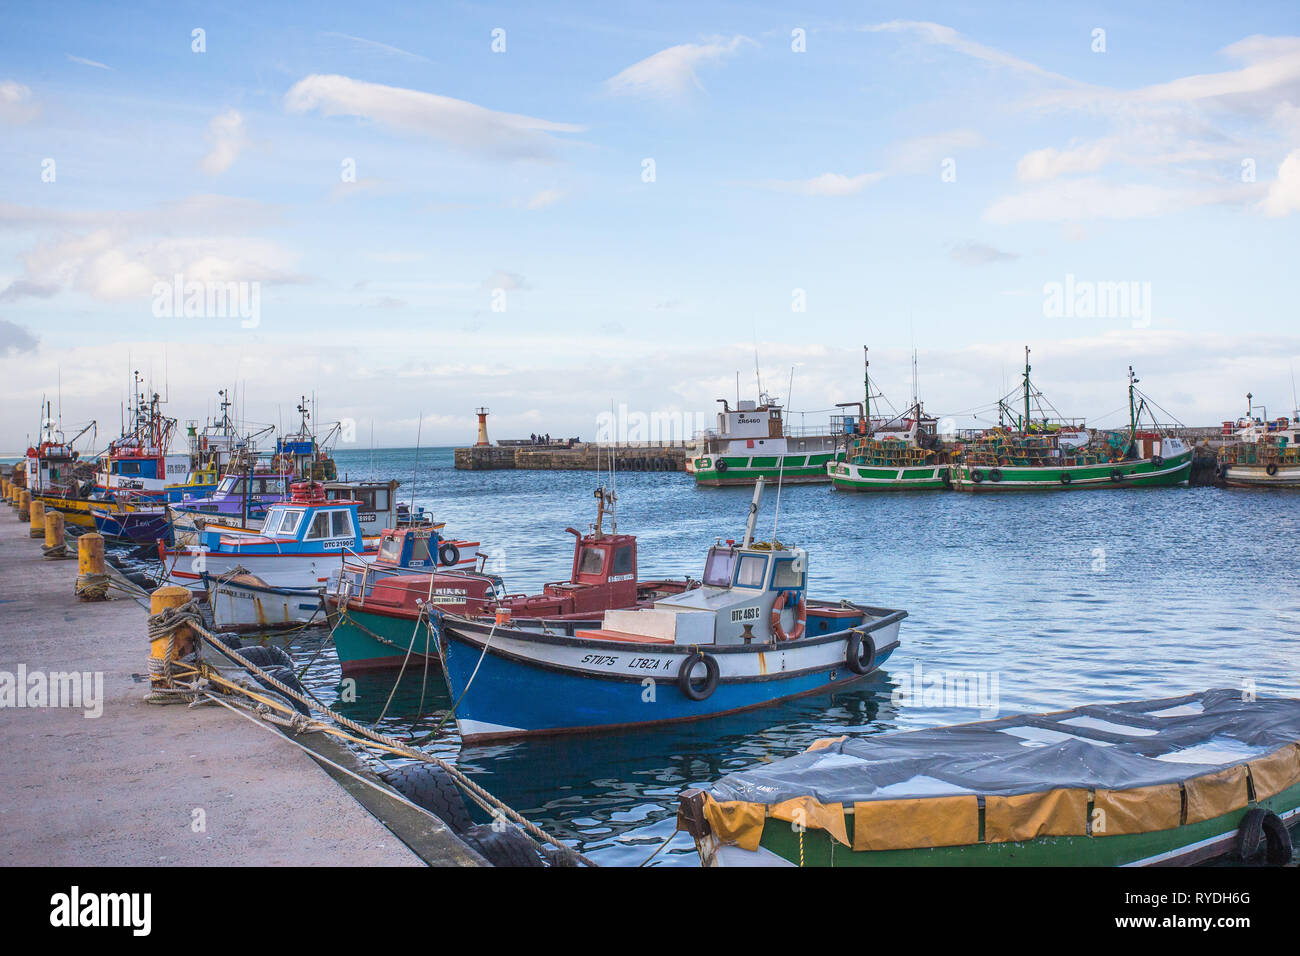 Fishing boats colourful or multicoloured moored for the evening at Kalk Bay harbour or harbor, False Bay, Cape Peninsula, South Africa Stock Photo